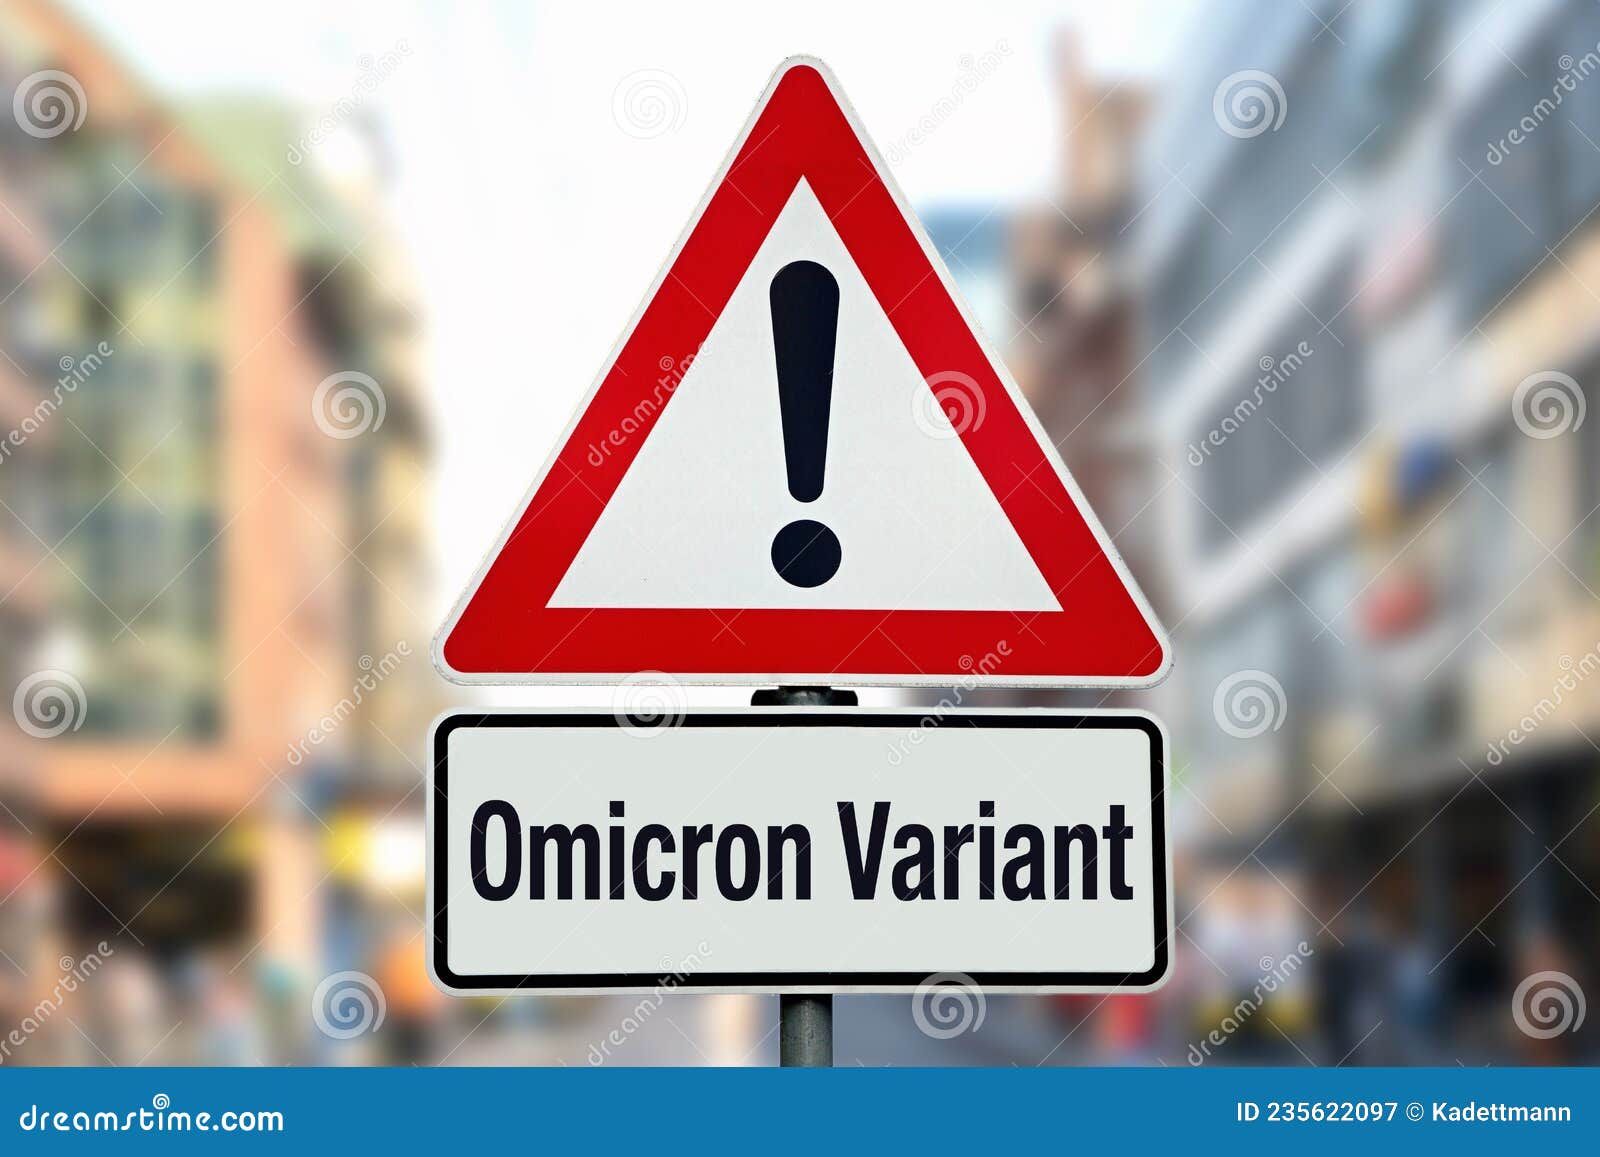 omicron variant at warning sign in city